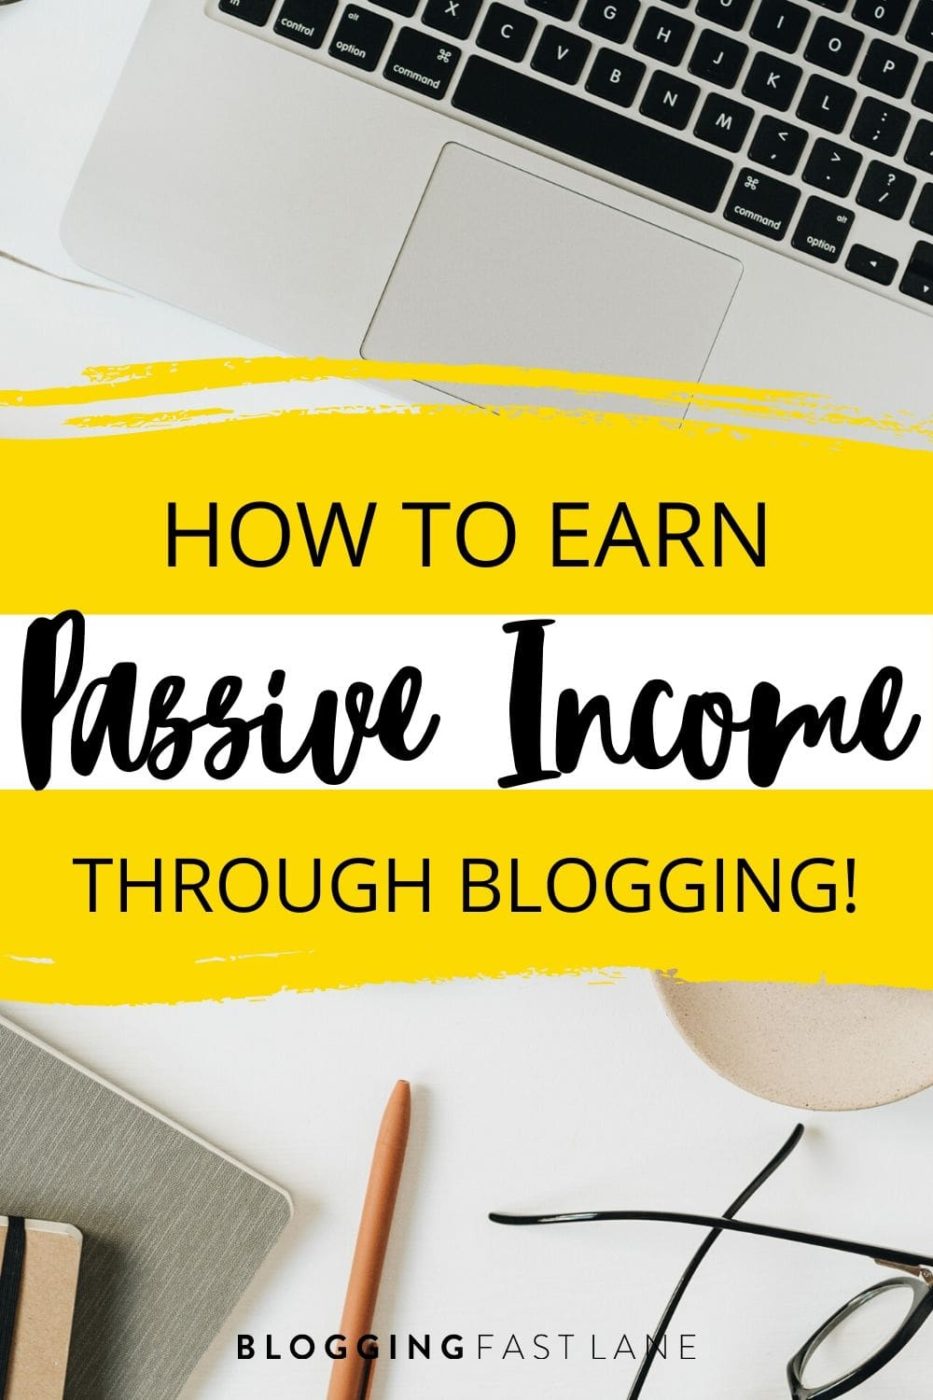 Passive Income Blogging | Curious about how bloggers earn a living? Check out our complete guide to passive income blogging to learn our secrets to success!